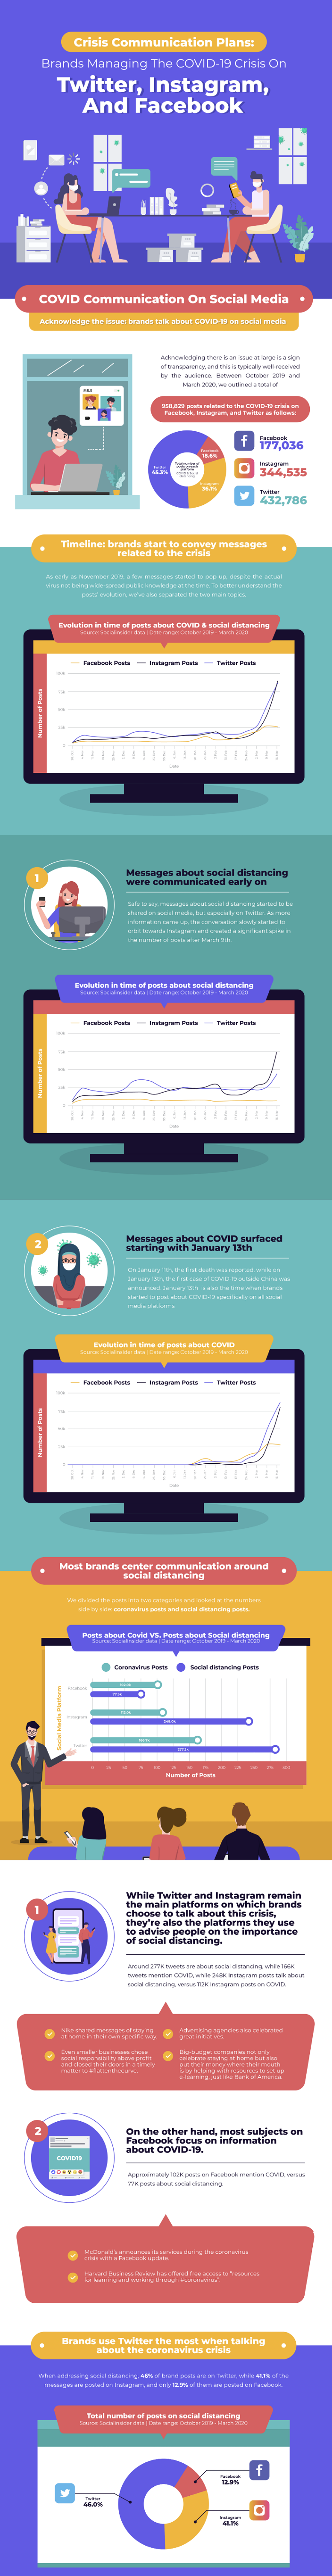 the evolving discussion around covid 19 and how brands have responded infographic